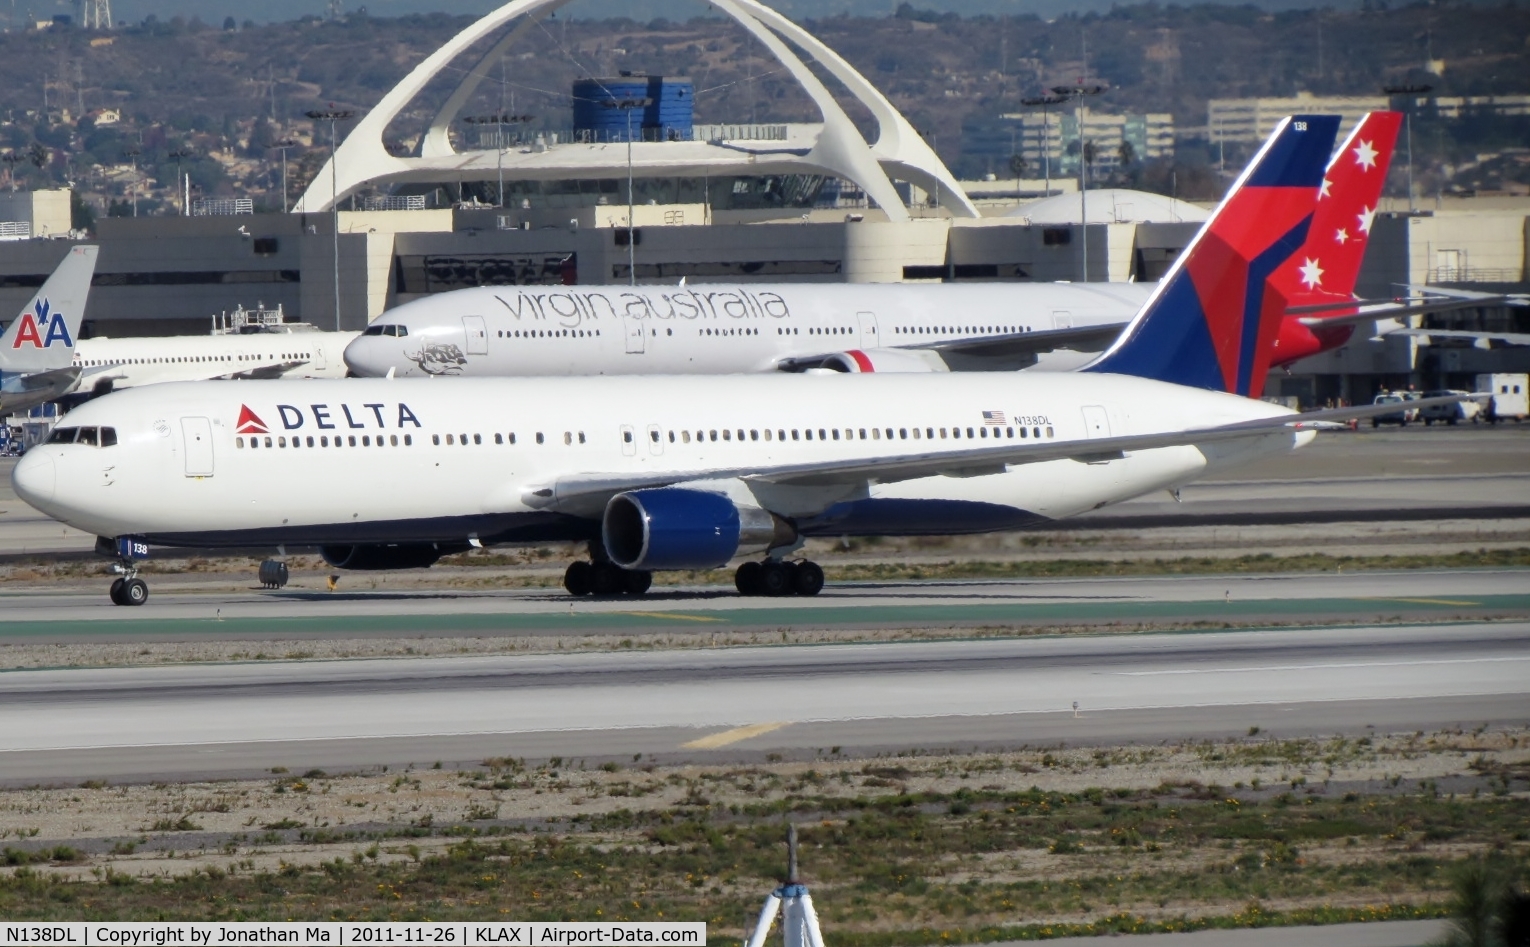 N138DL, 1991 Boeing 767-332 C/N 25409, Lots of Delta planes at LAX